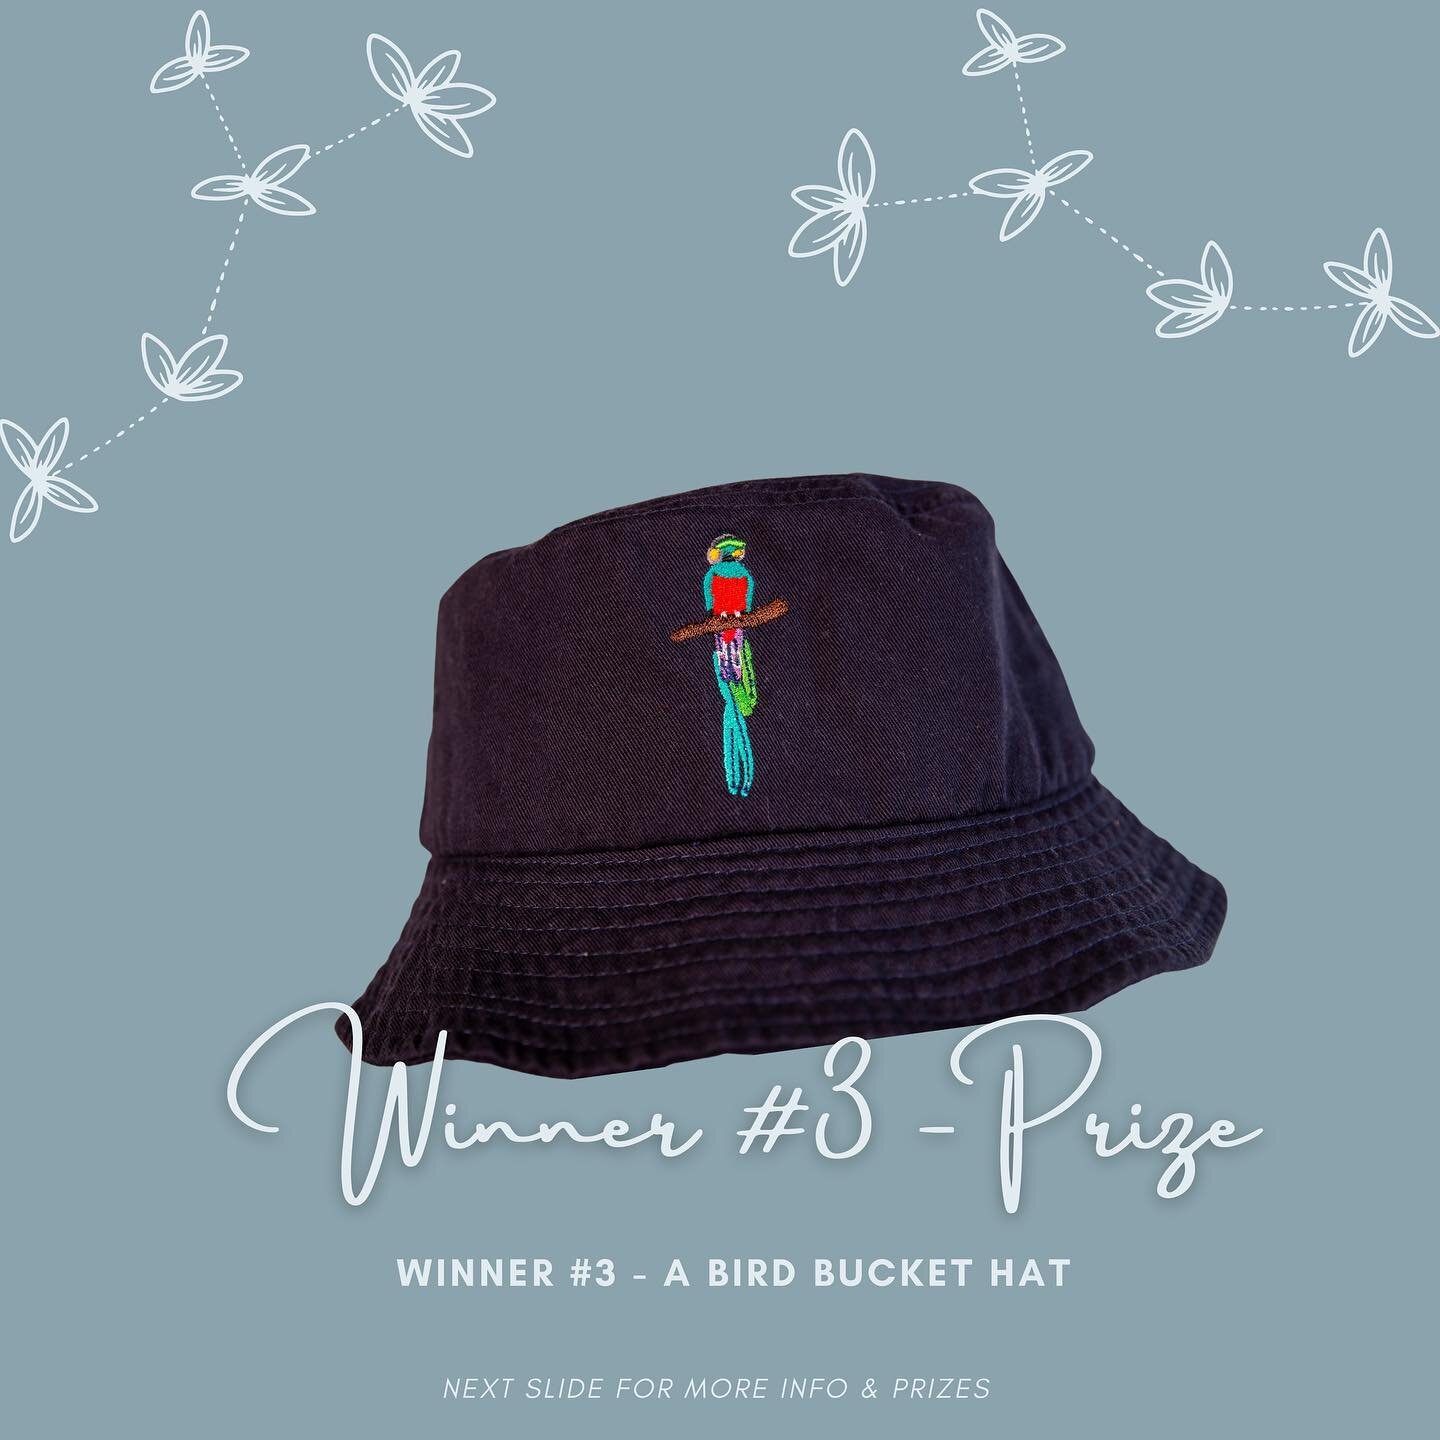 ✨Raffle✨

Winner #3 Prize:

A Bird Bucket Hat

Yes! The Queztal has headphones 🎧 

✨ HOW TO ENTER ✨

$5 FOR EACH ENTRY

🎙 Send your entry to our Venmo with your social media Username (IG or TW) as a comment. 

🎙 You can enter multiple times

🎙 If